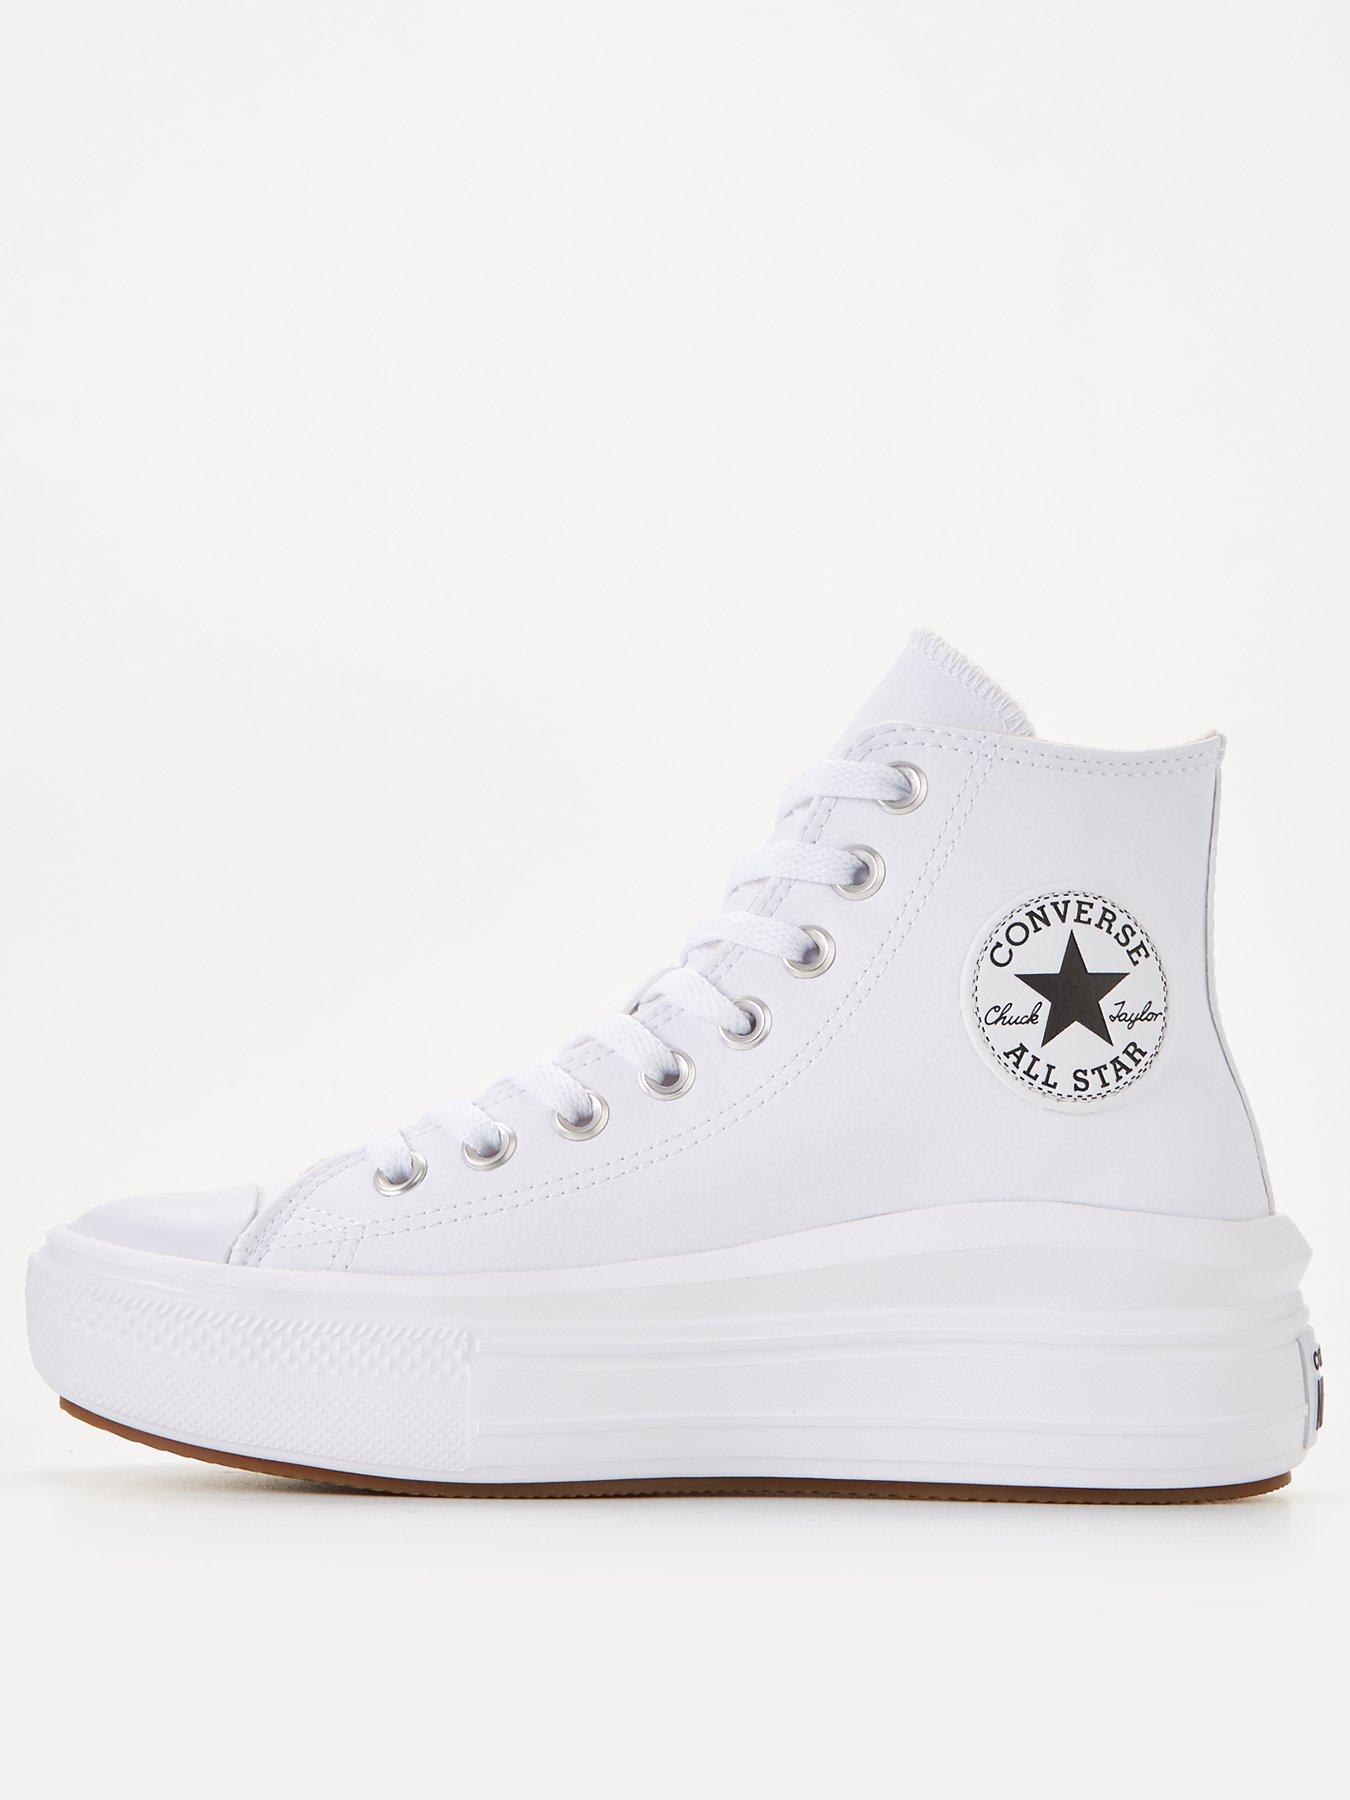 Íncubo Heredero horno Women's White Converse Trainers | Very.co.uk